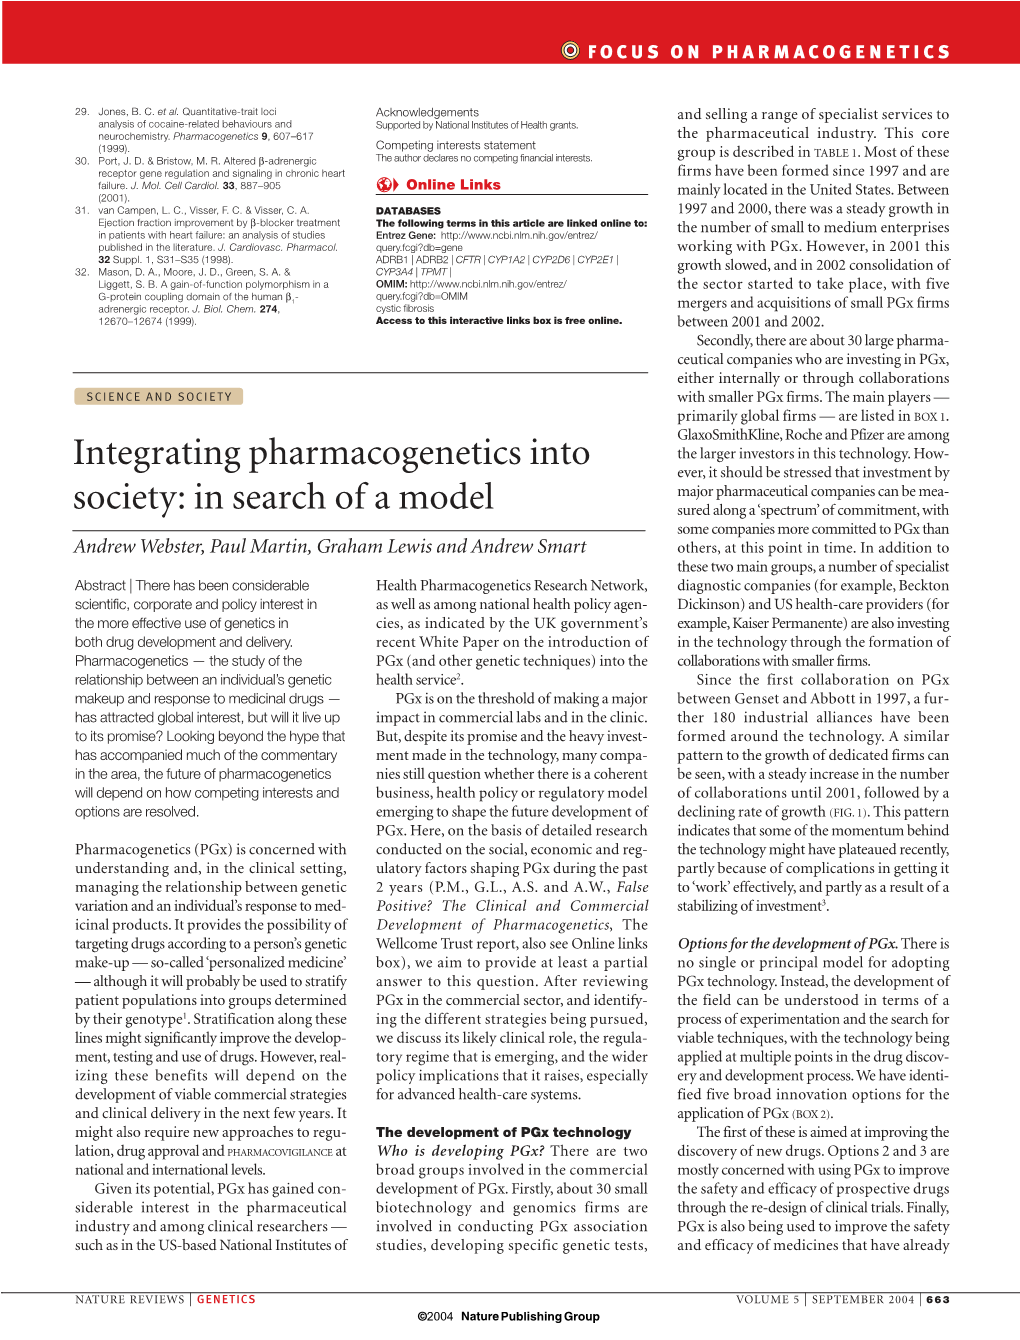 Integrating Pharmacogenetics Into Society: in Search of a Model